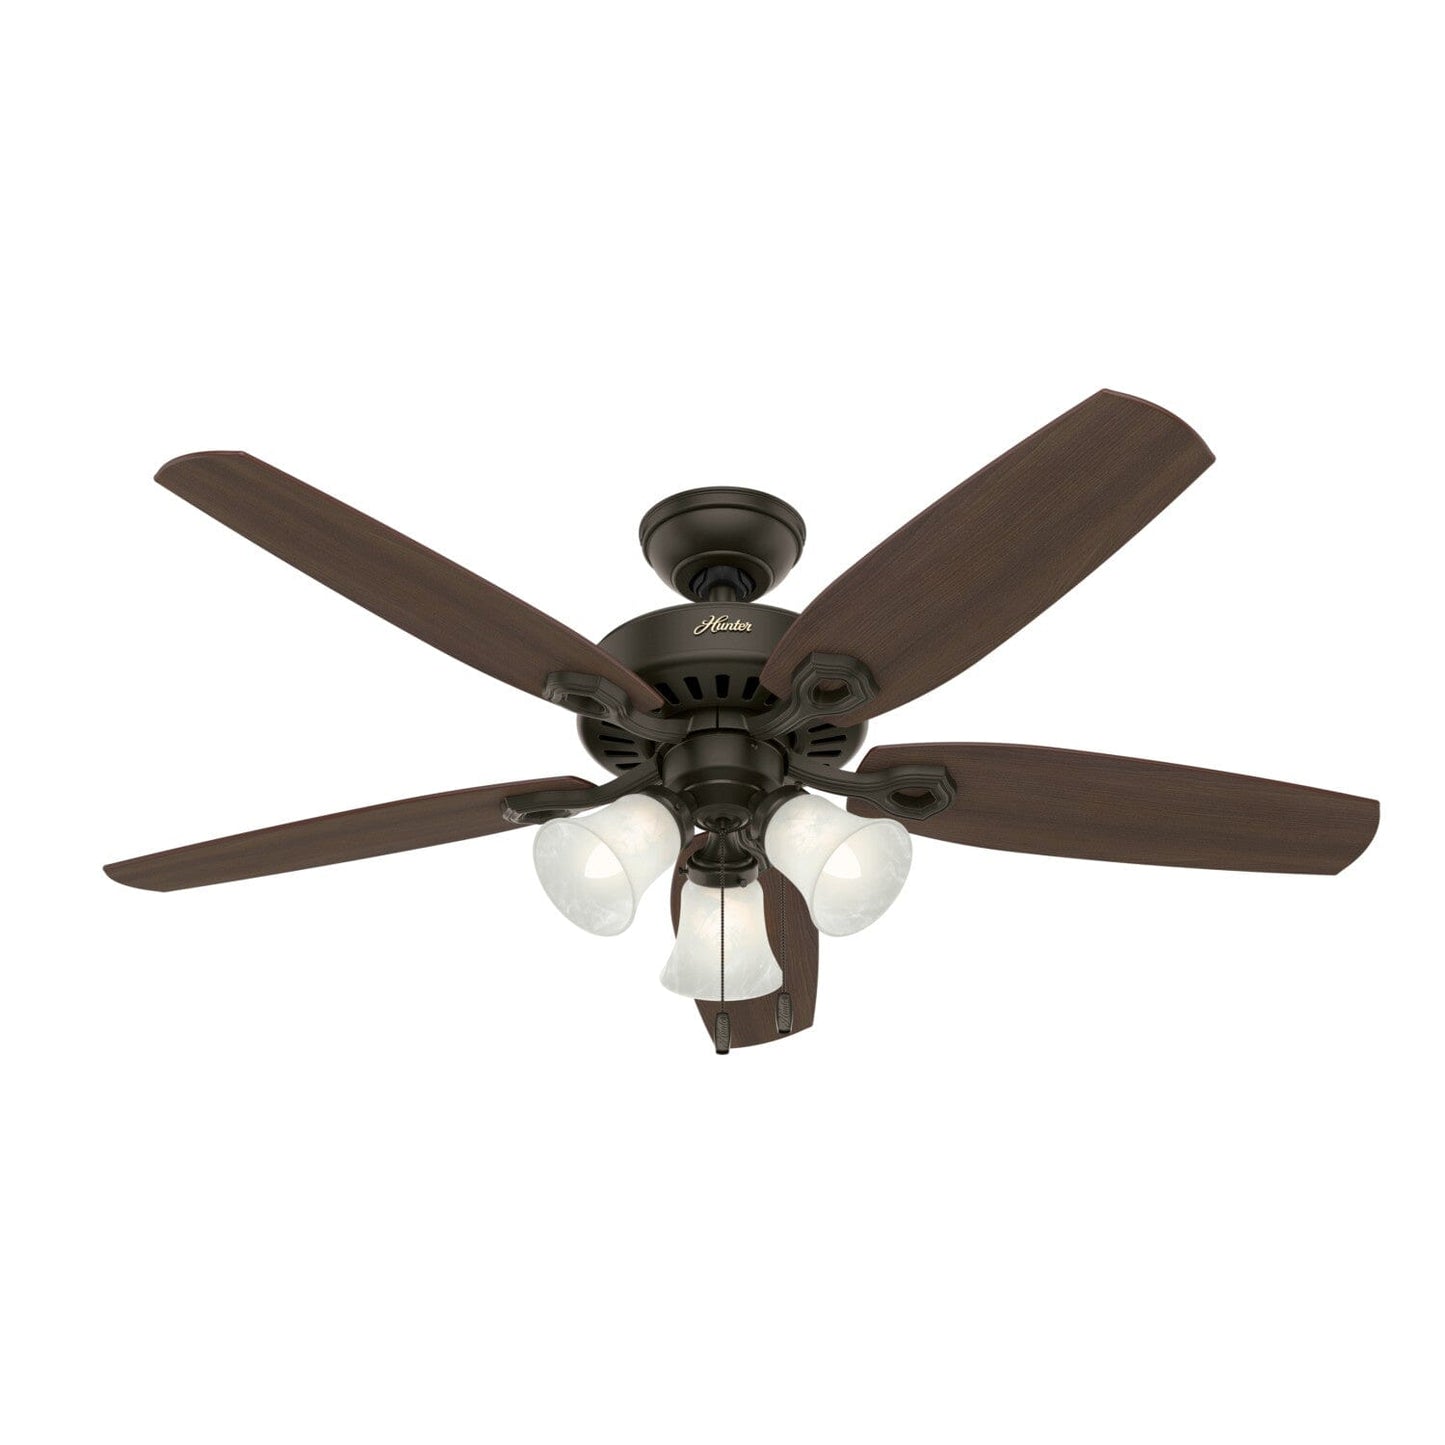 Builder Plus with 3 Lights 52 inch Ceiling Fans Hunter New Bronze - Brazilian Cherry 